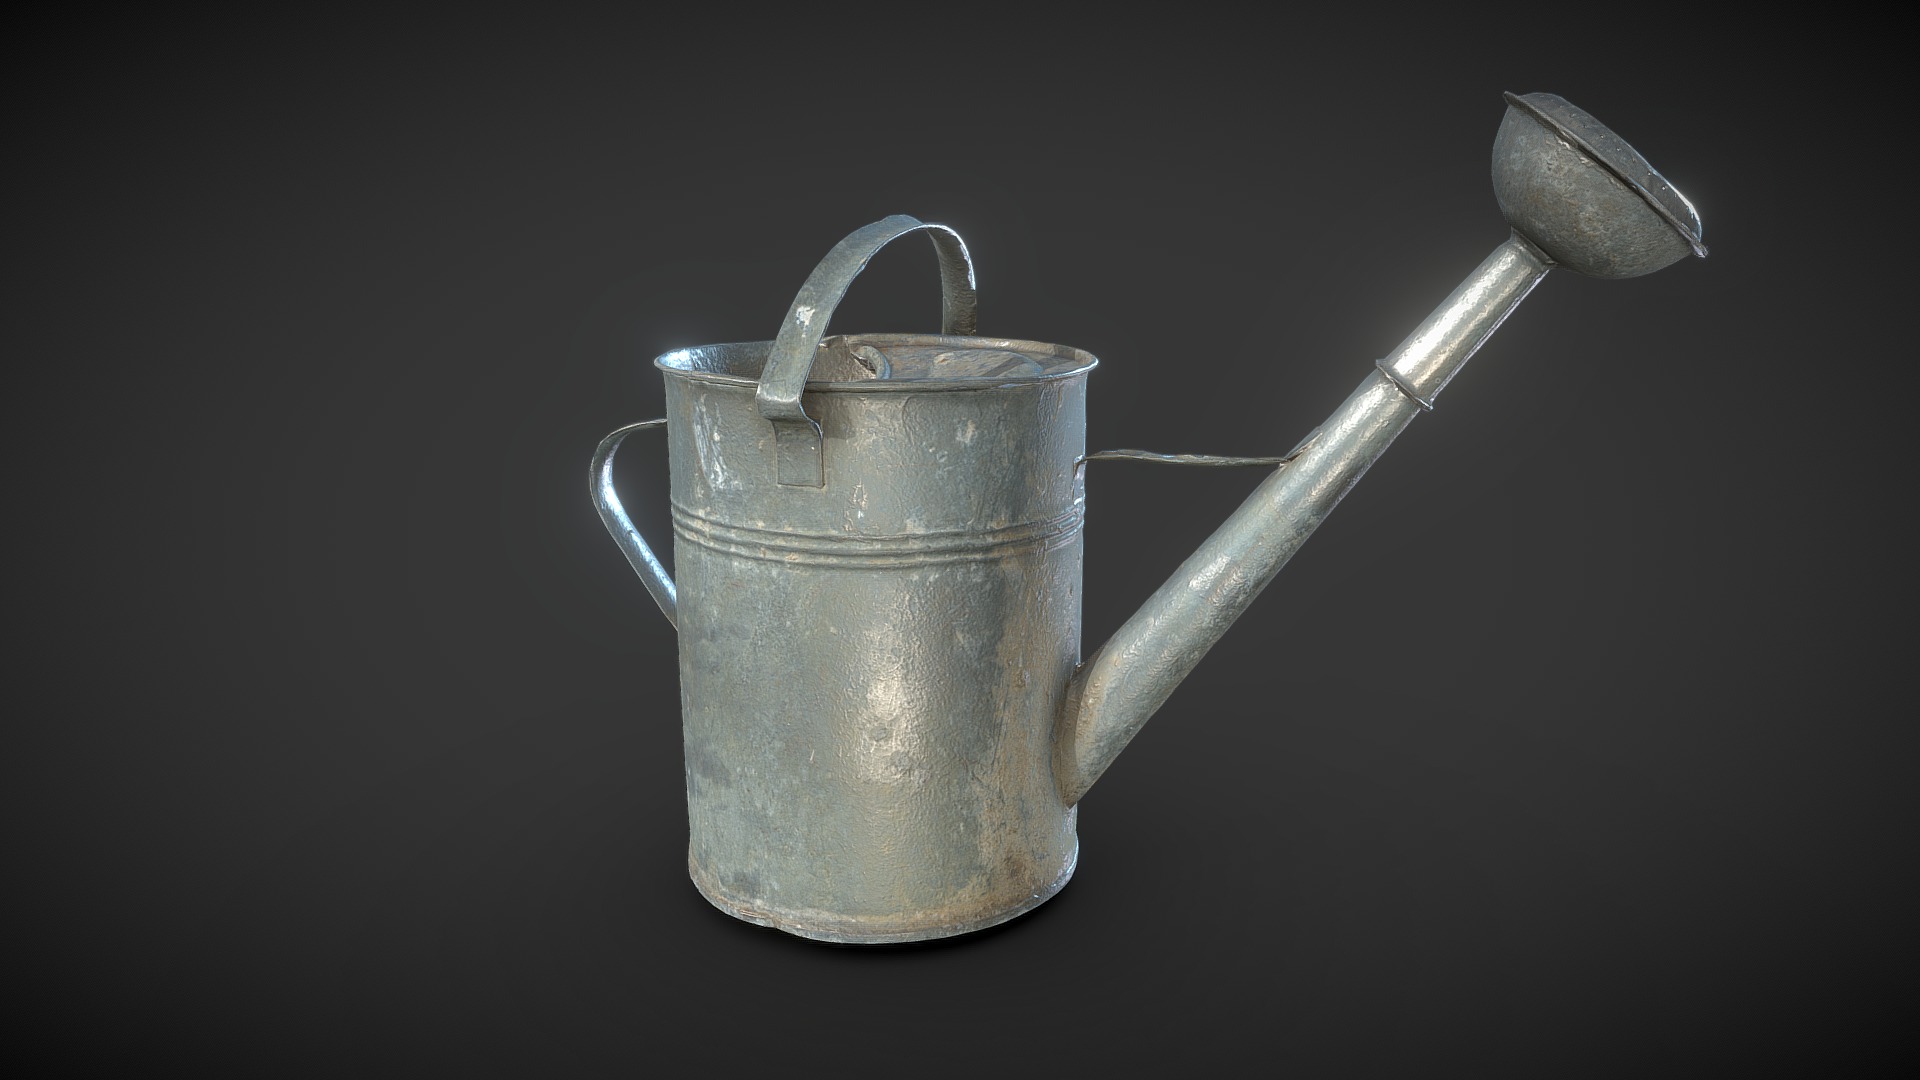 3D model Dirty Watering Can 3D scan - This is a 3D model of the Dirty Watering Can 3D scan. The 3D model is about a silver teapot with a handle.